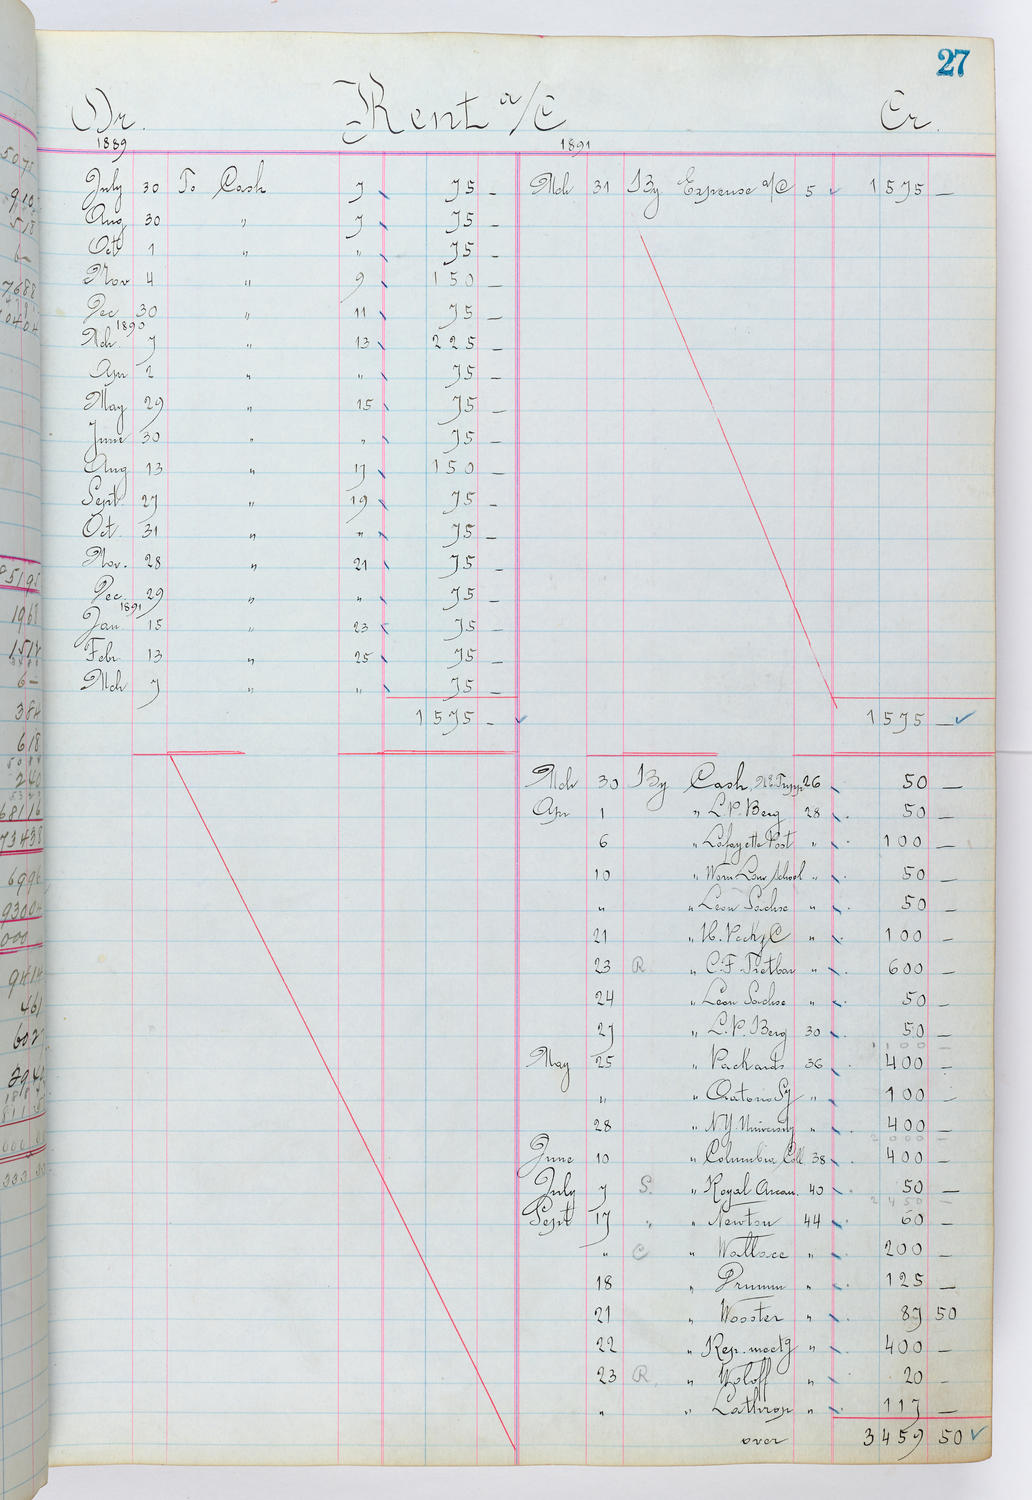 Music Hall Accounting Ledger, volume 1, page 27